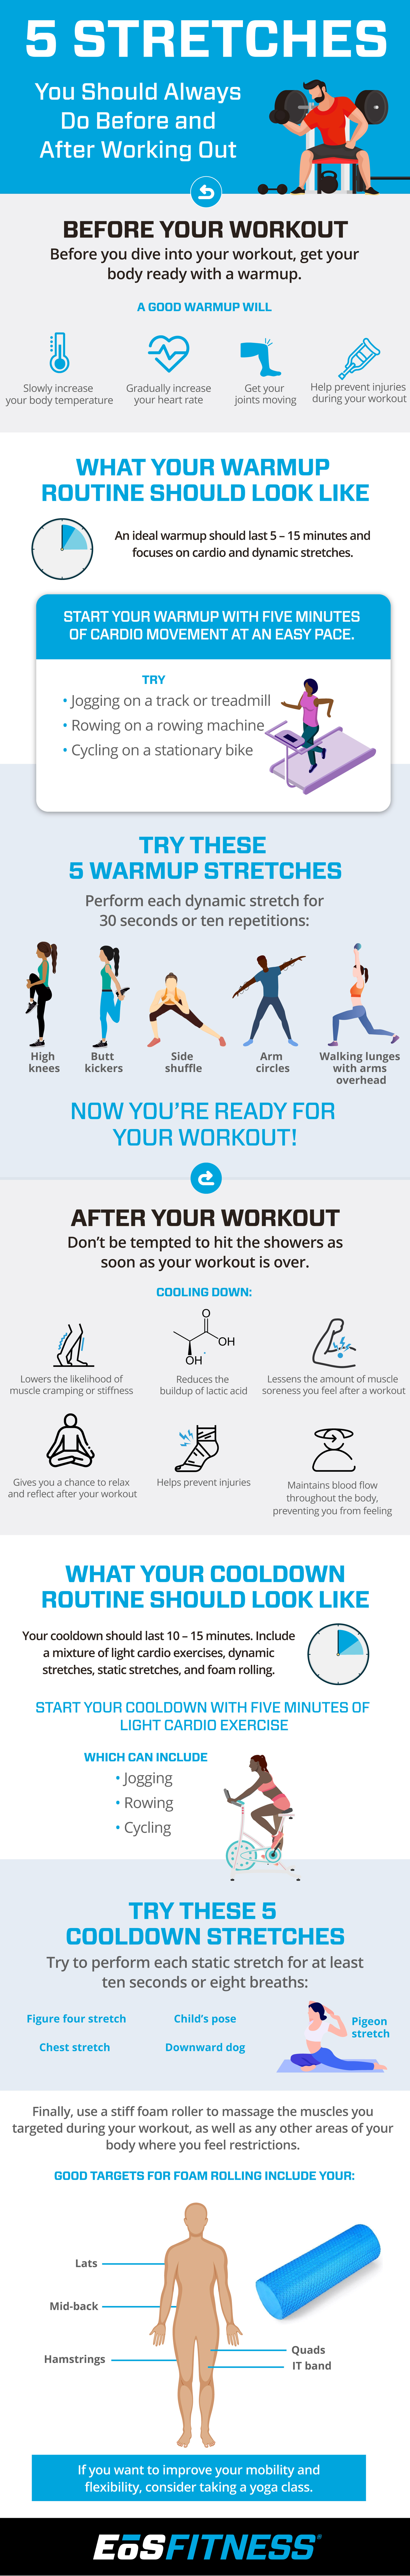 Infographic – 5 Stretches You Should Always Do Before and After Working Out